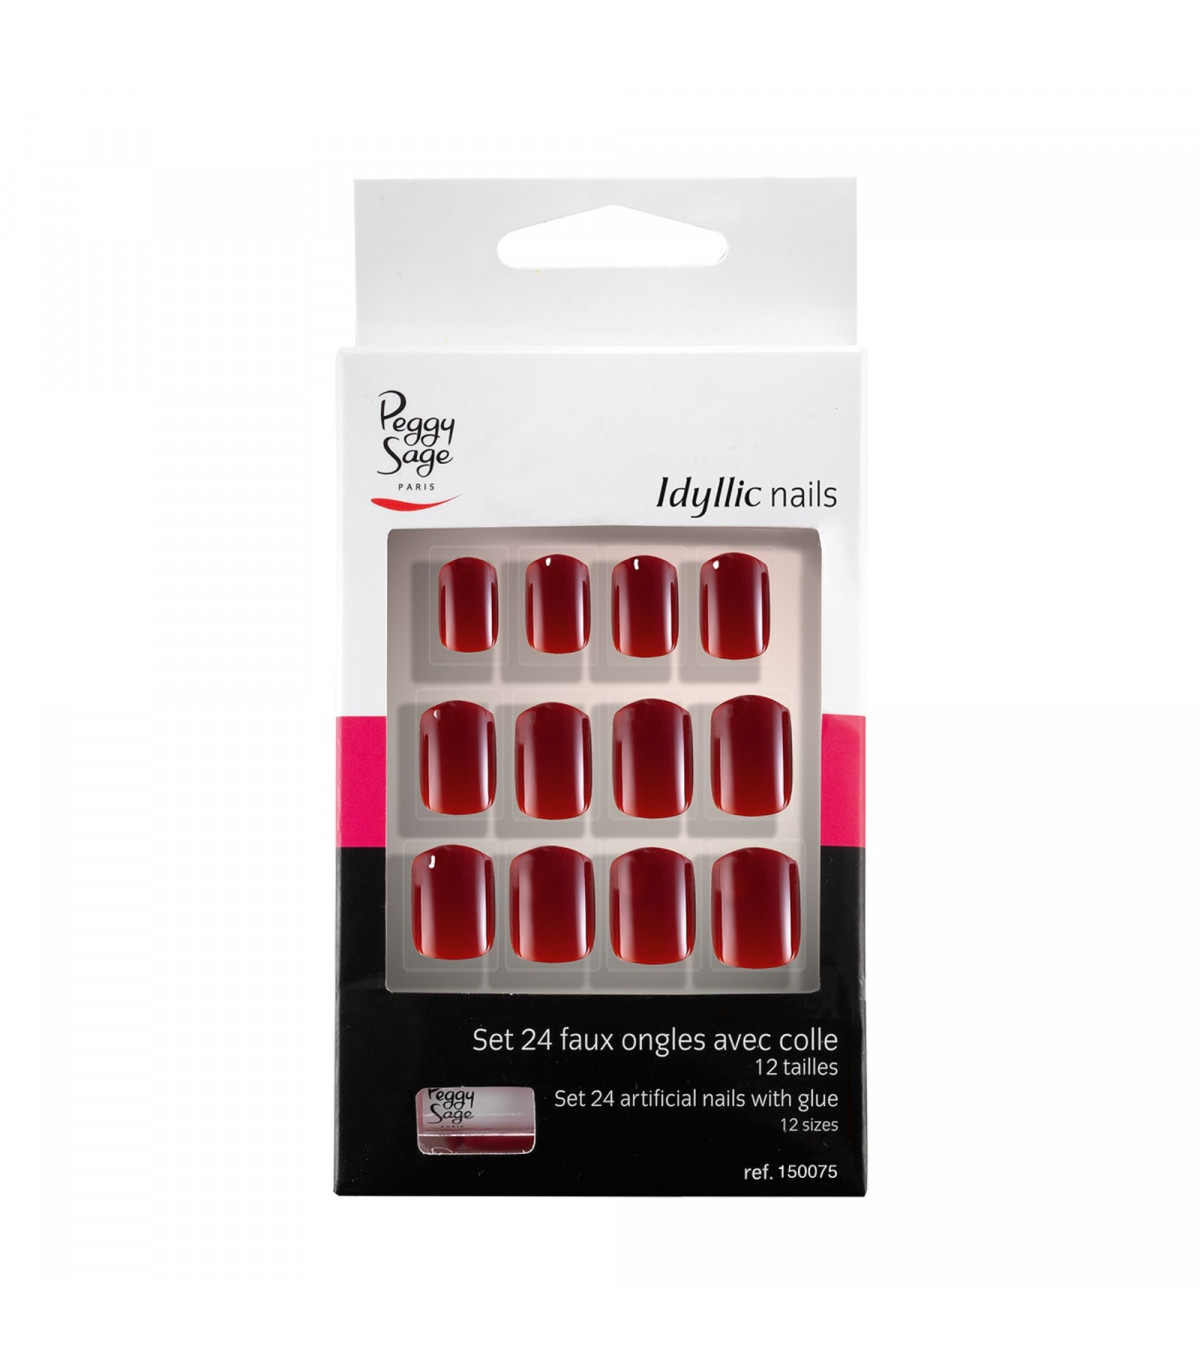 Kit 24 faux ongles Idyllic nails - red